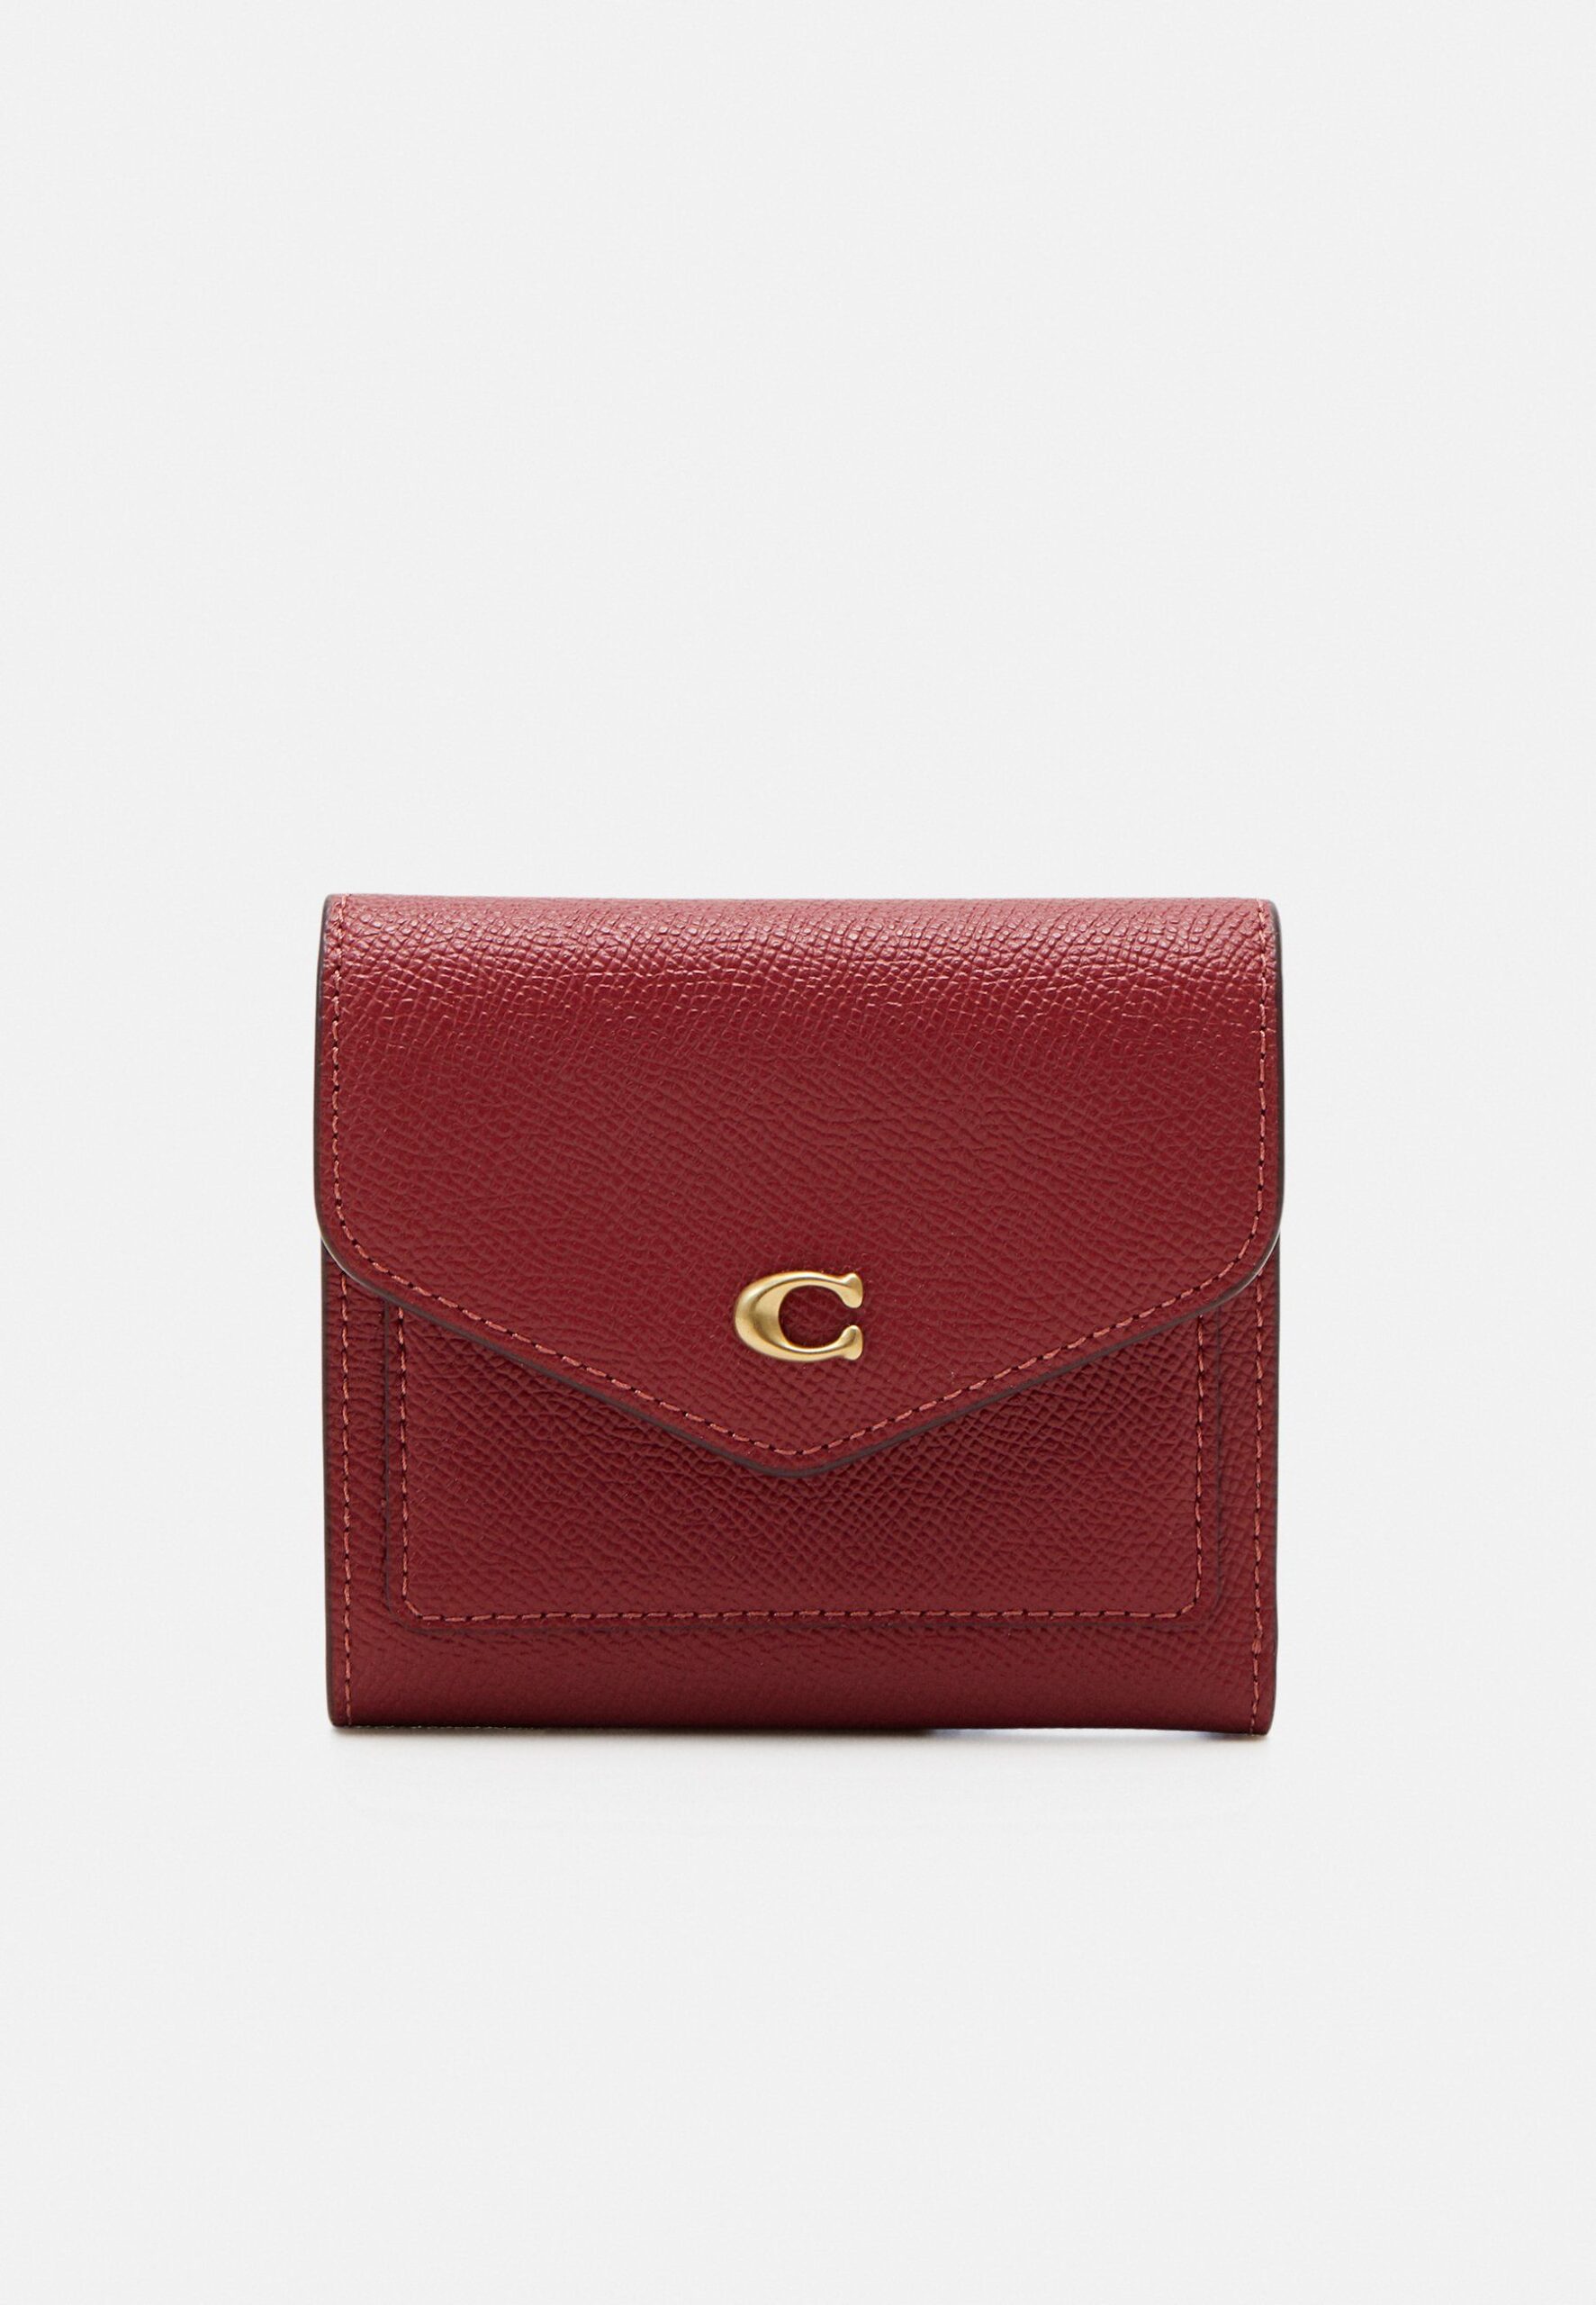 Coach Wallets: Timeless Luxury and Functionality in Coach Wallets